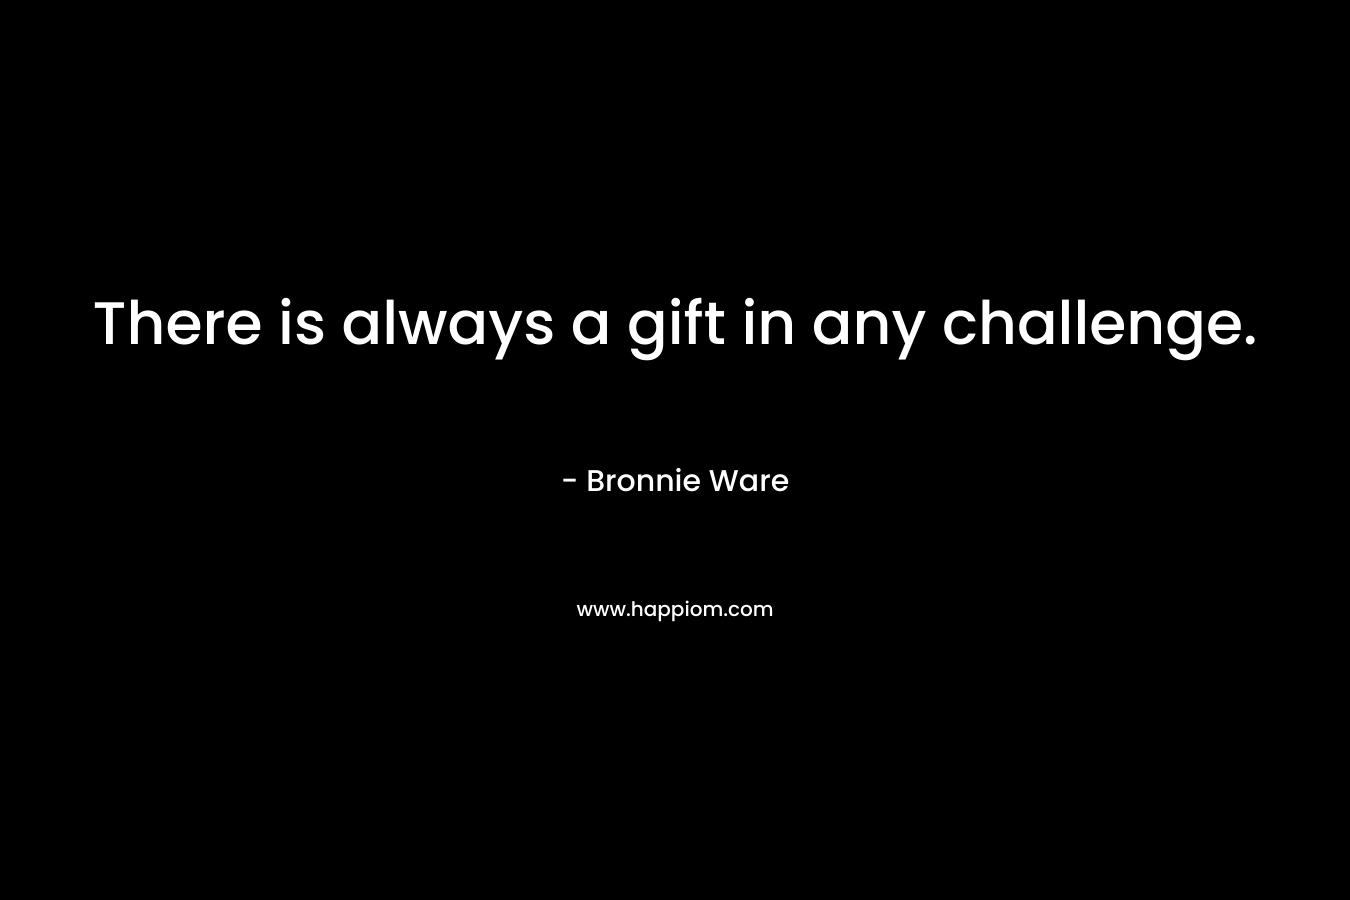 There is always a gift in any challenge.